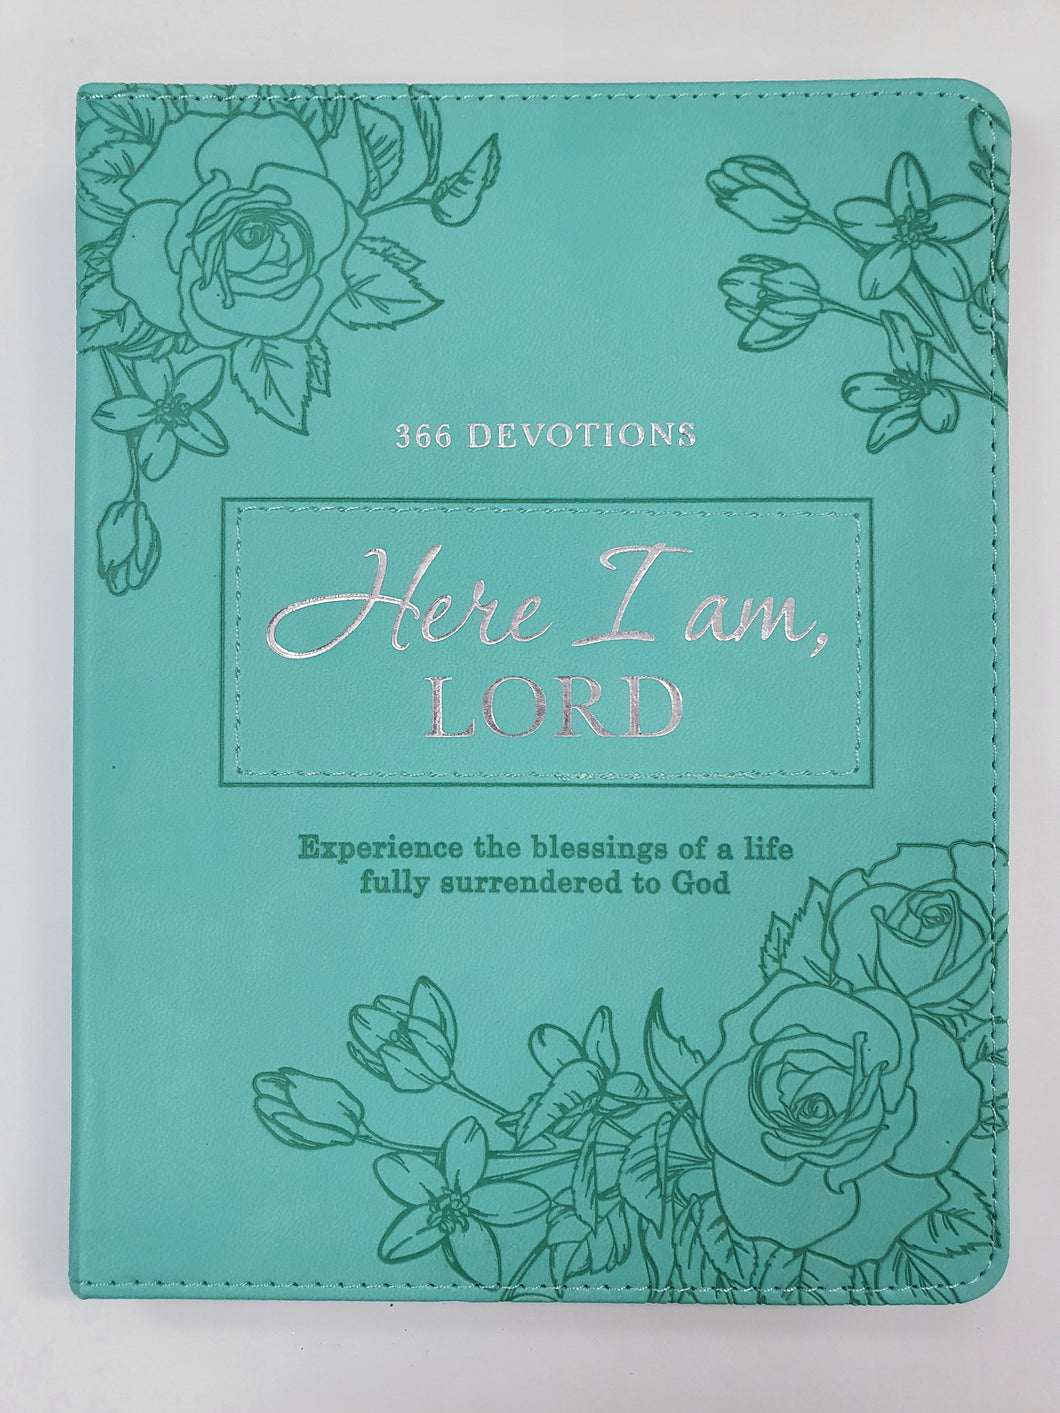 Here I am, Lord: 366 Devotions